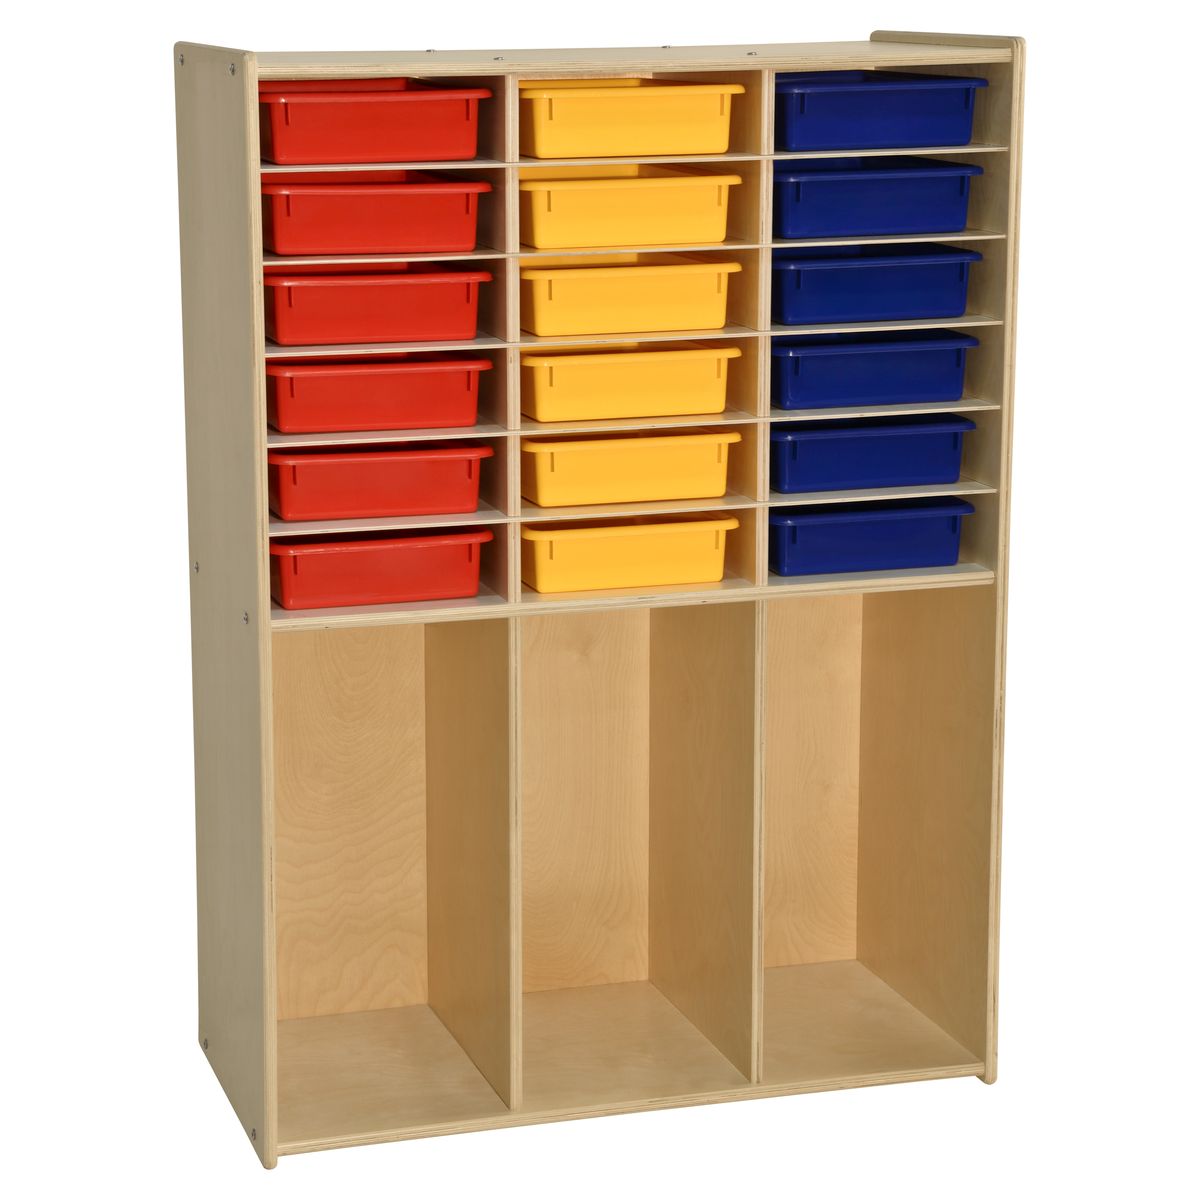 C990343-at 18 Bin Cabinet With Assorted Color - Rta